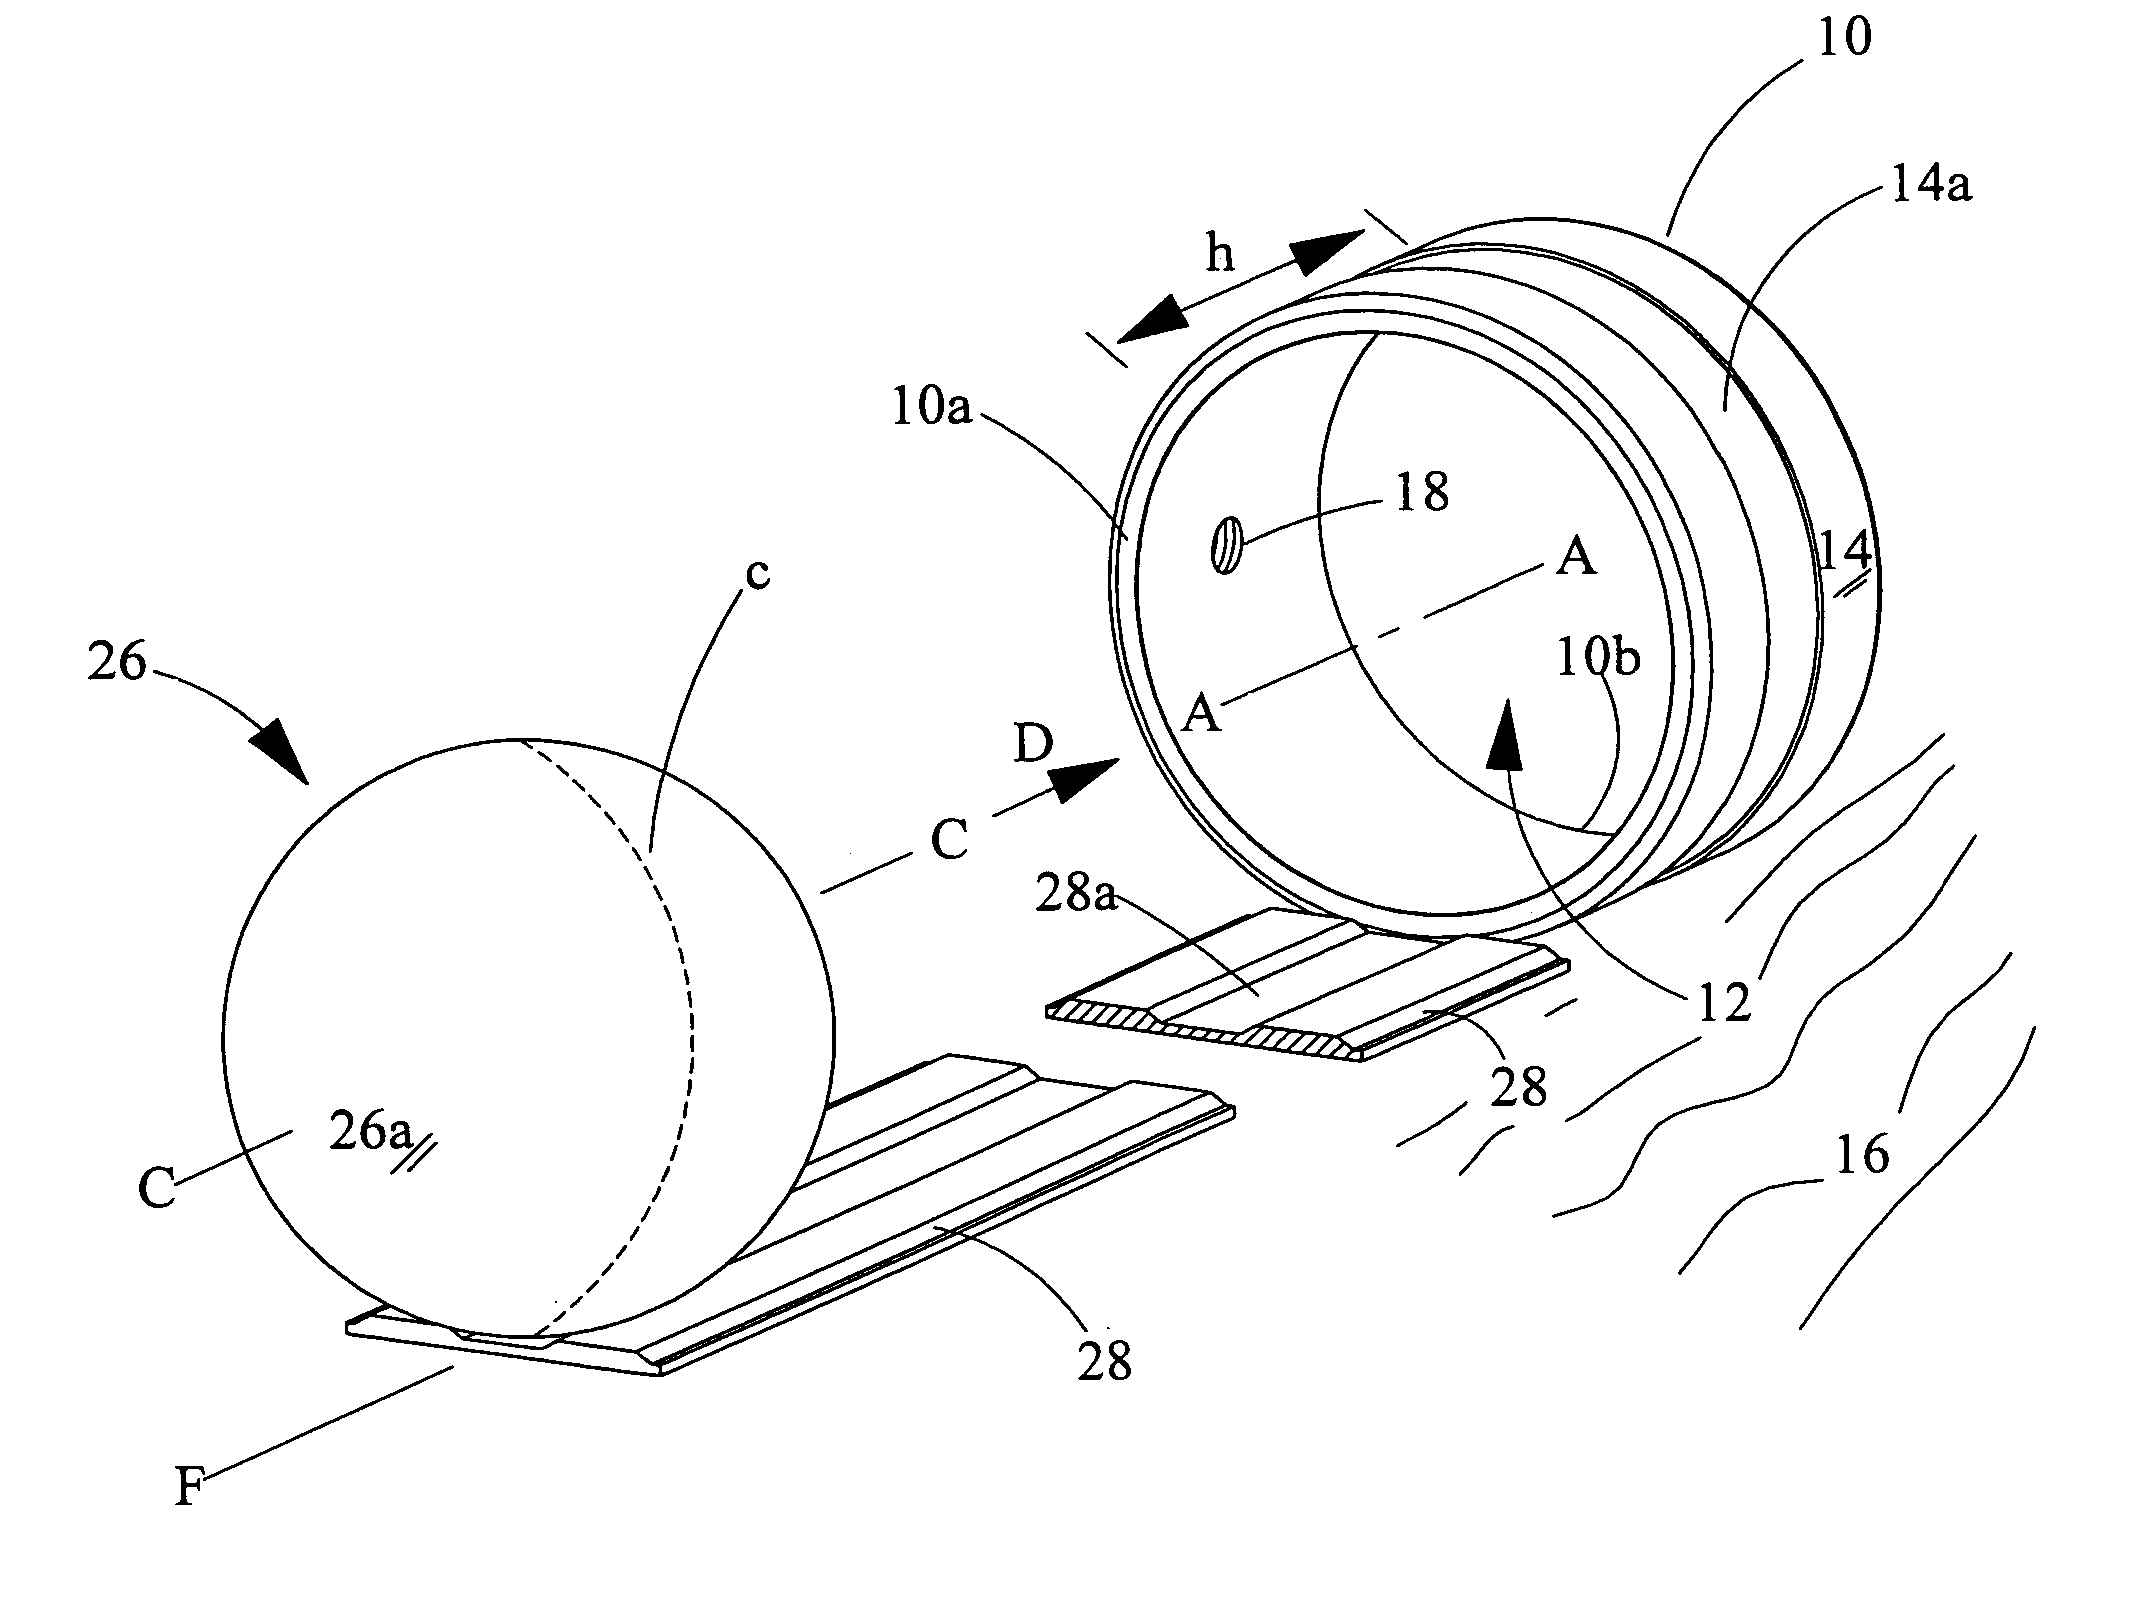 Practice putting and ball retrieving device